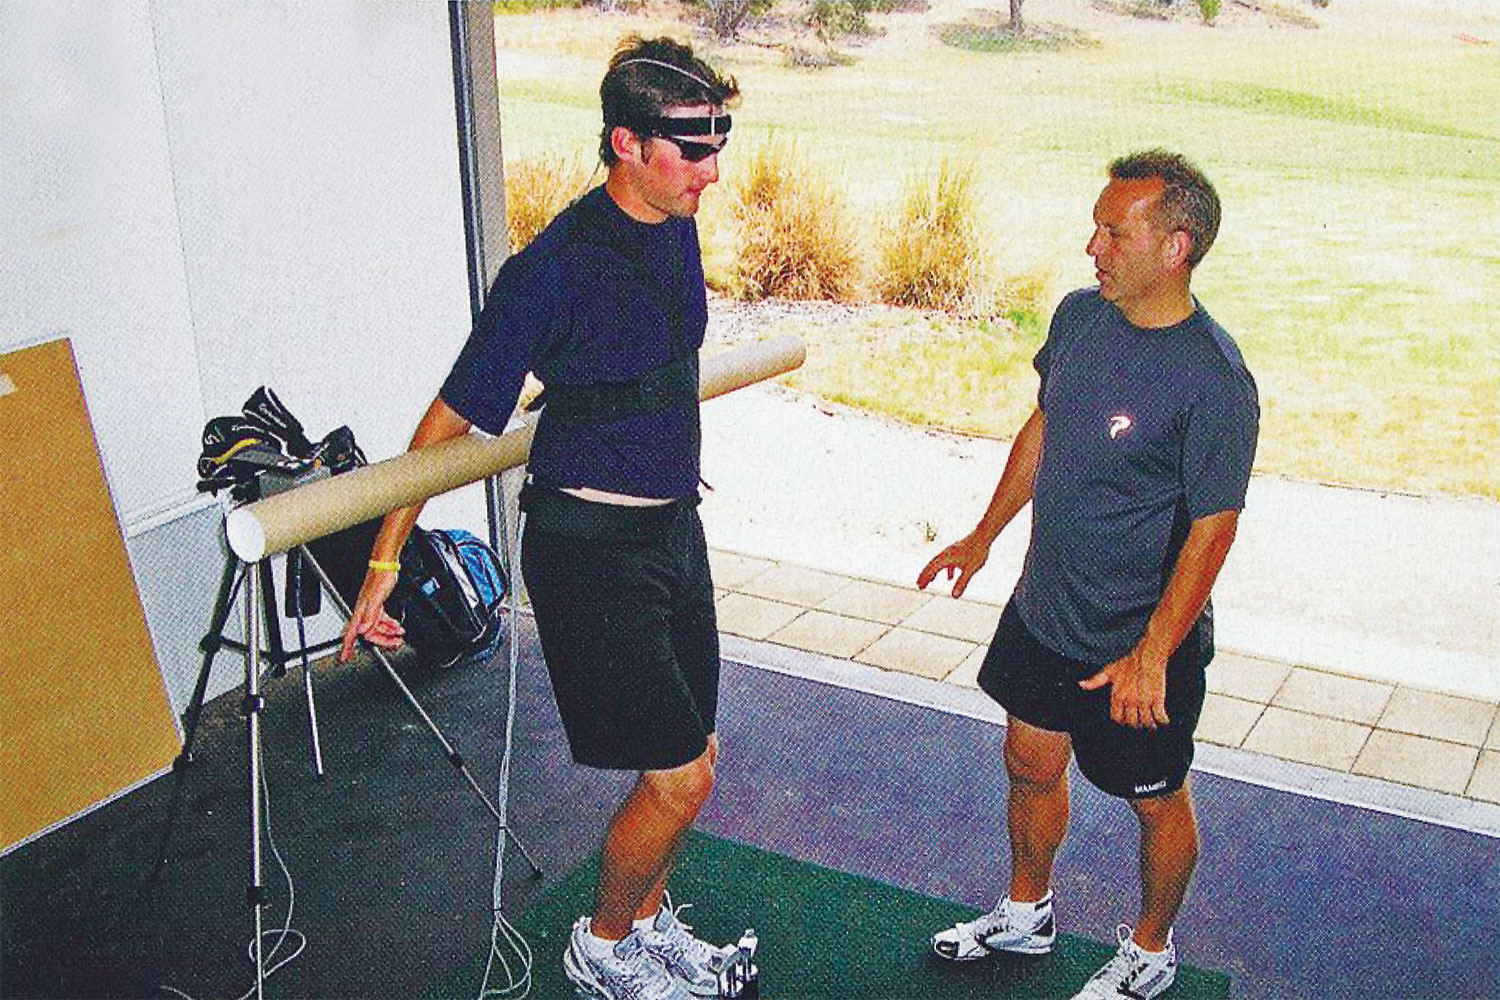 Sim and McMaster at work before the golf physiotherapist’s untimely passing.